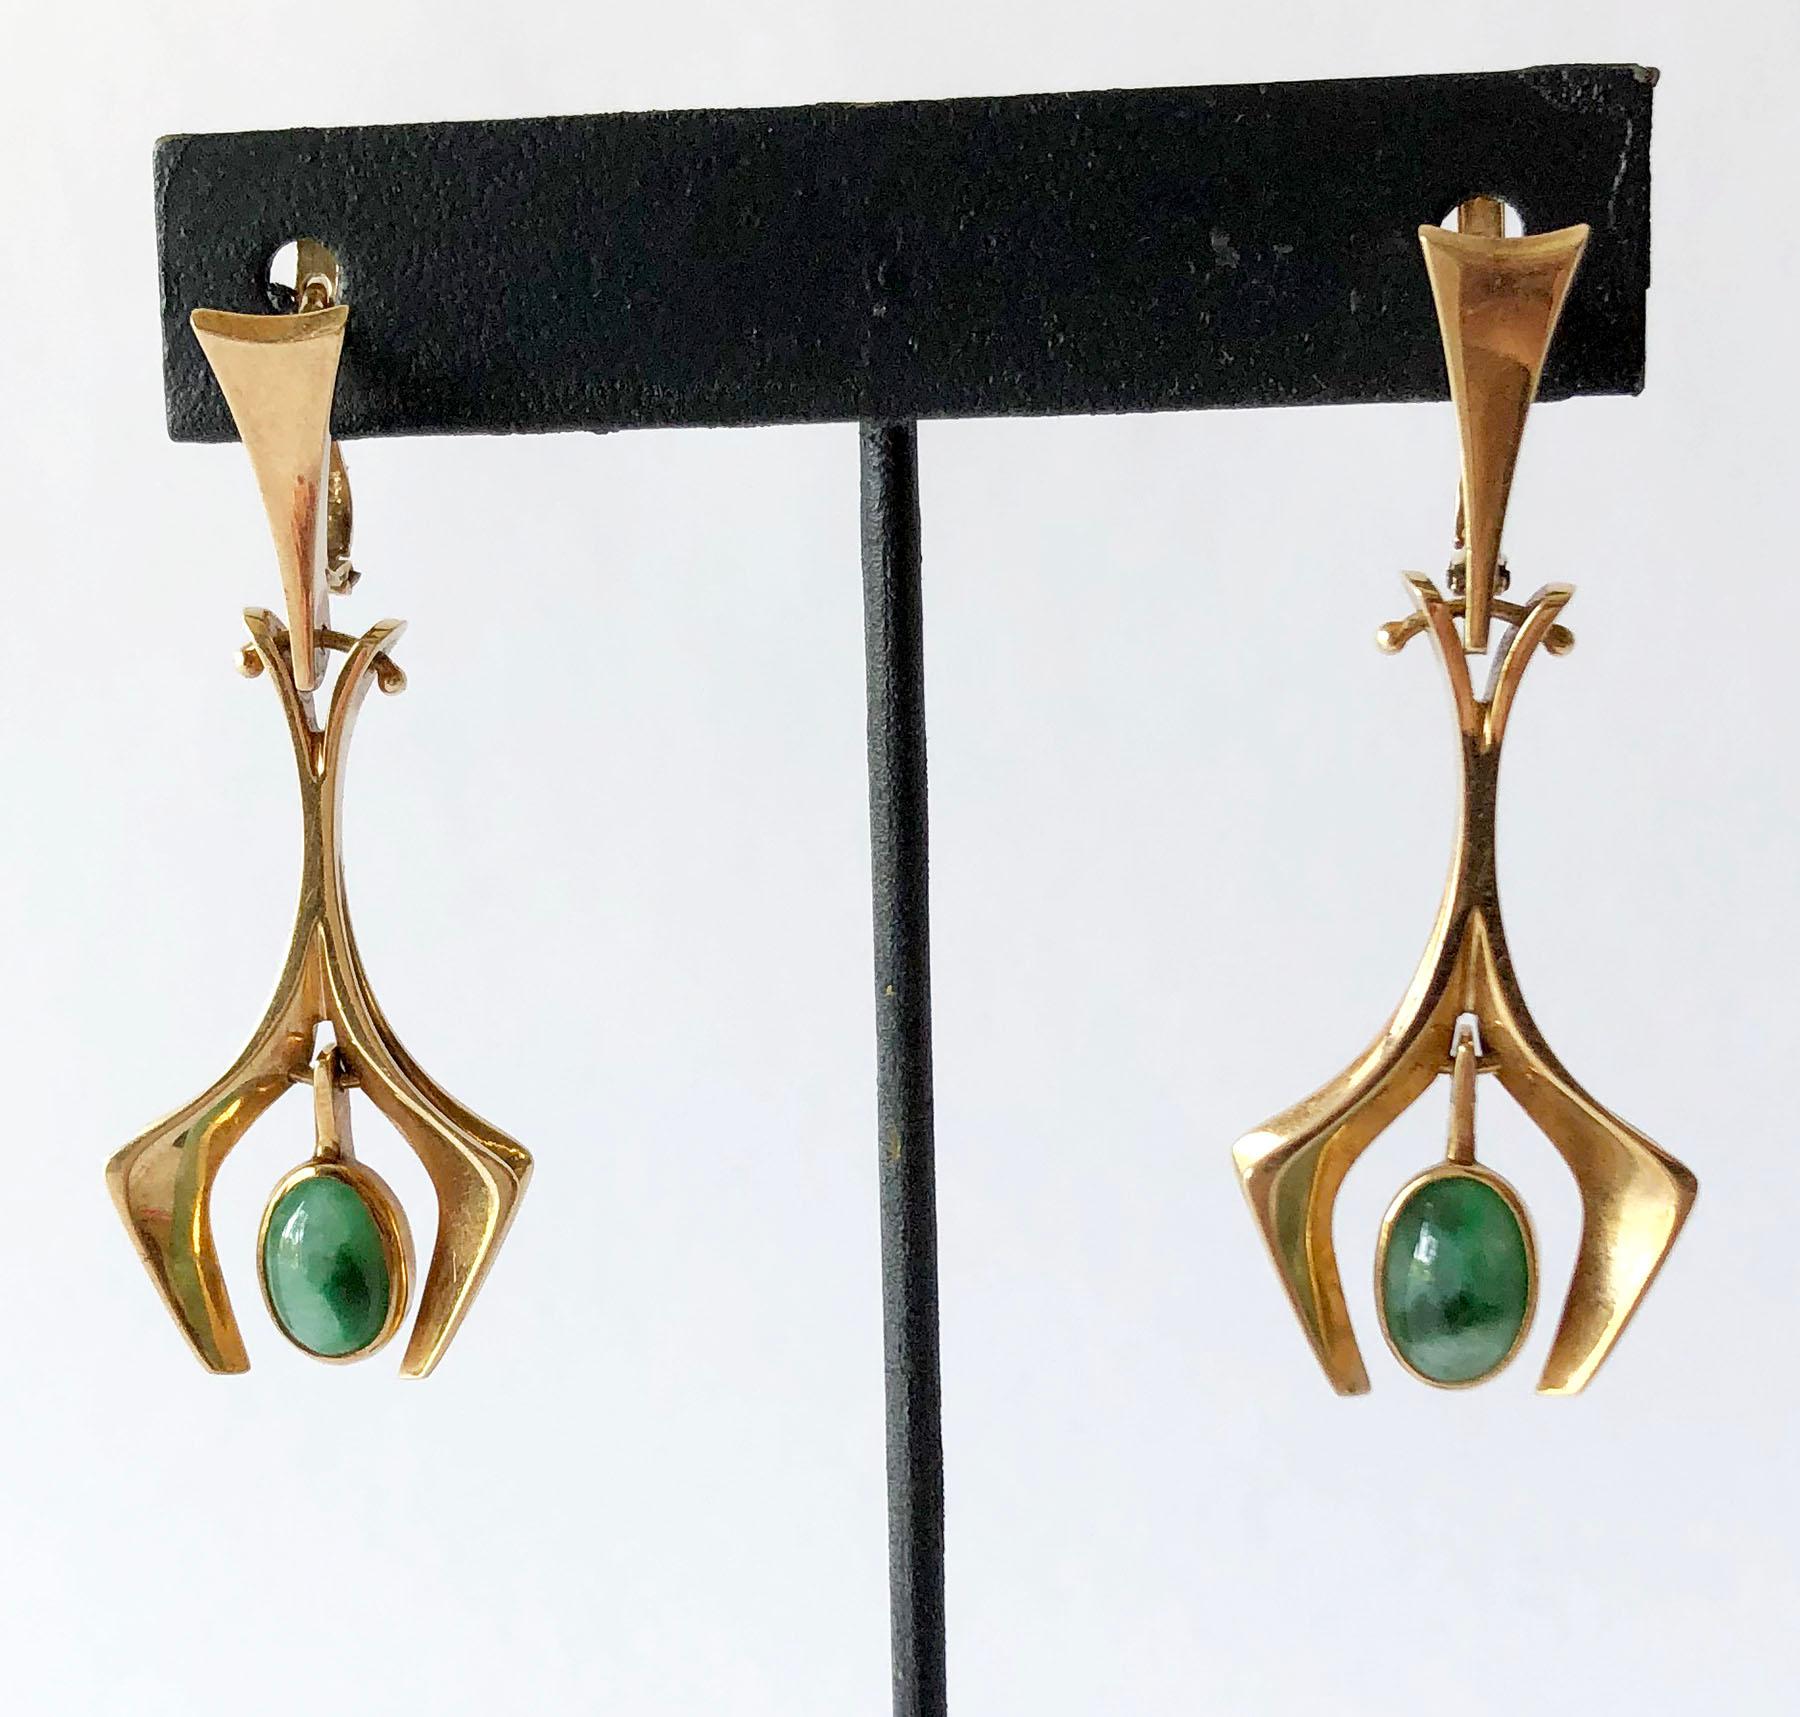 Hand made, one of a kind 14k gold and jade earrings created by Stanley Lecthzin of Detroit, Michigan.  Earrings measure 2